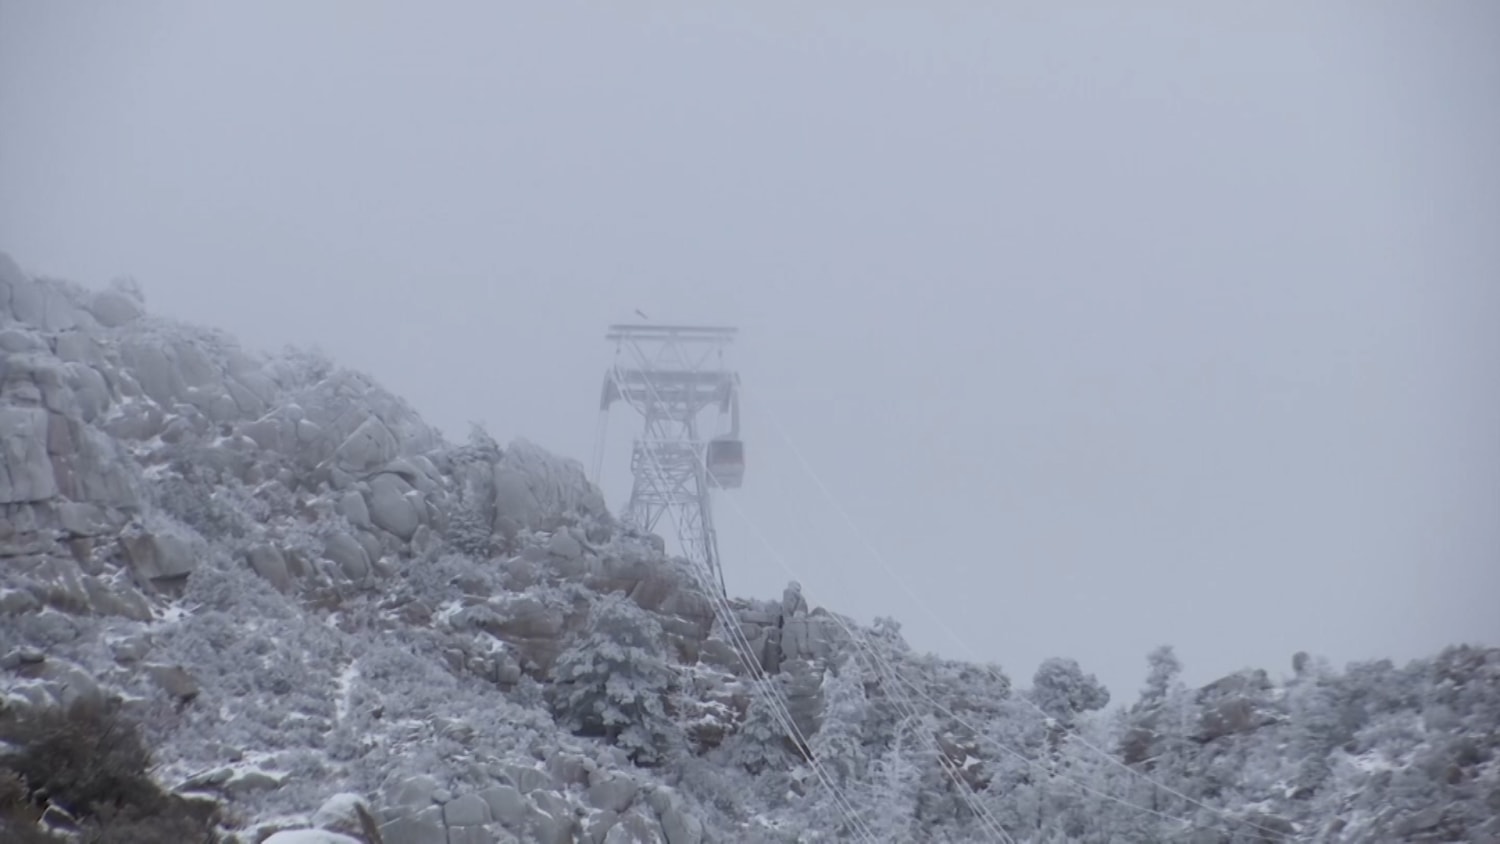 21 people rescued from Albuquerque cable cars, officials say